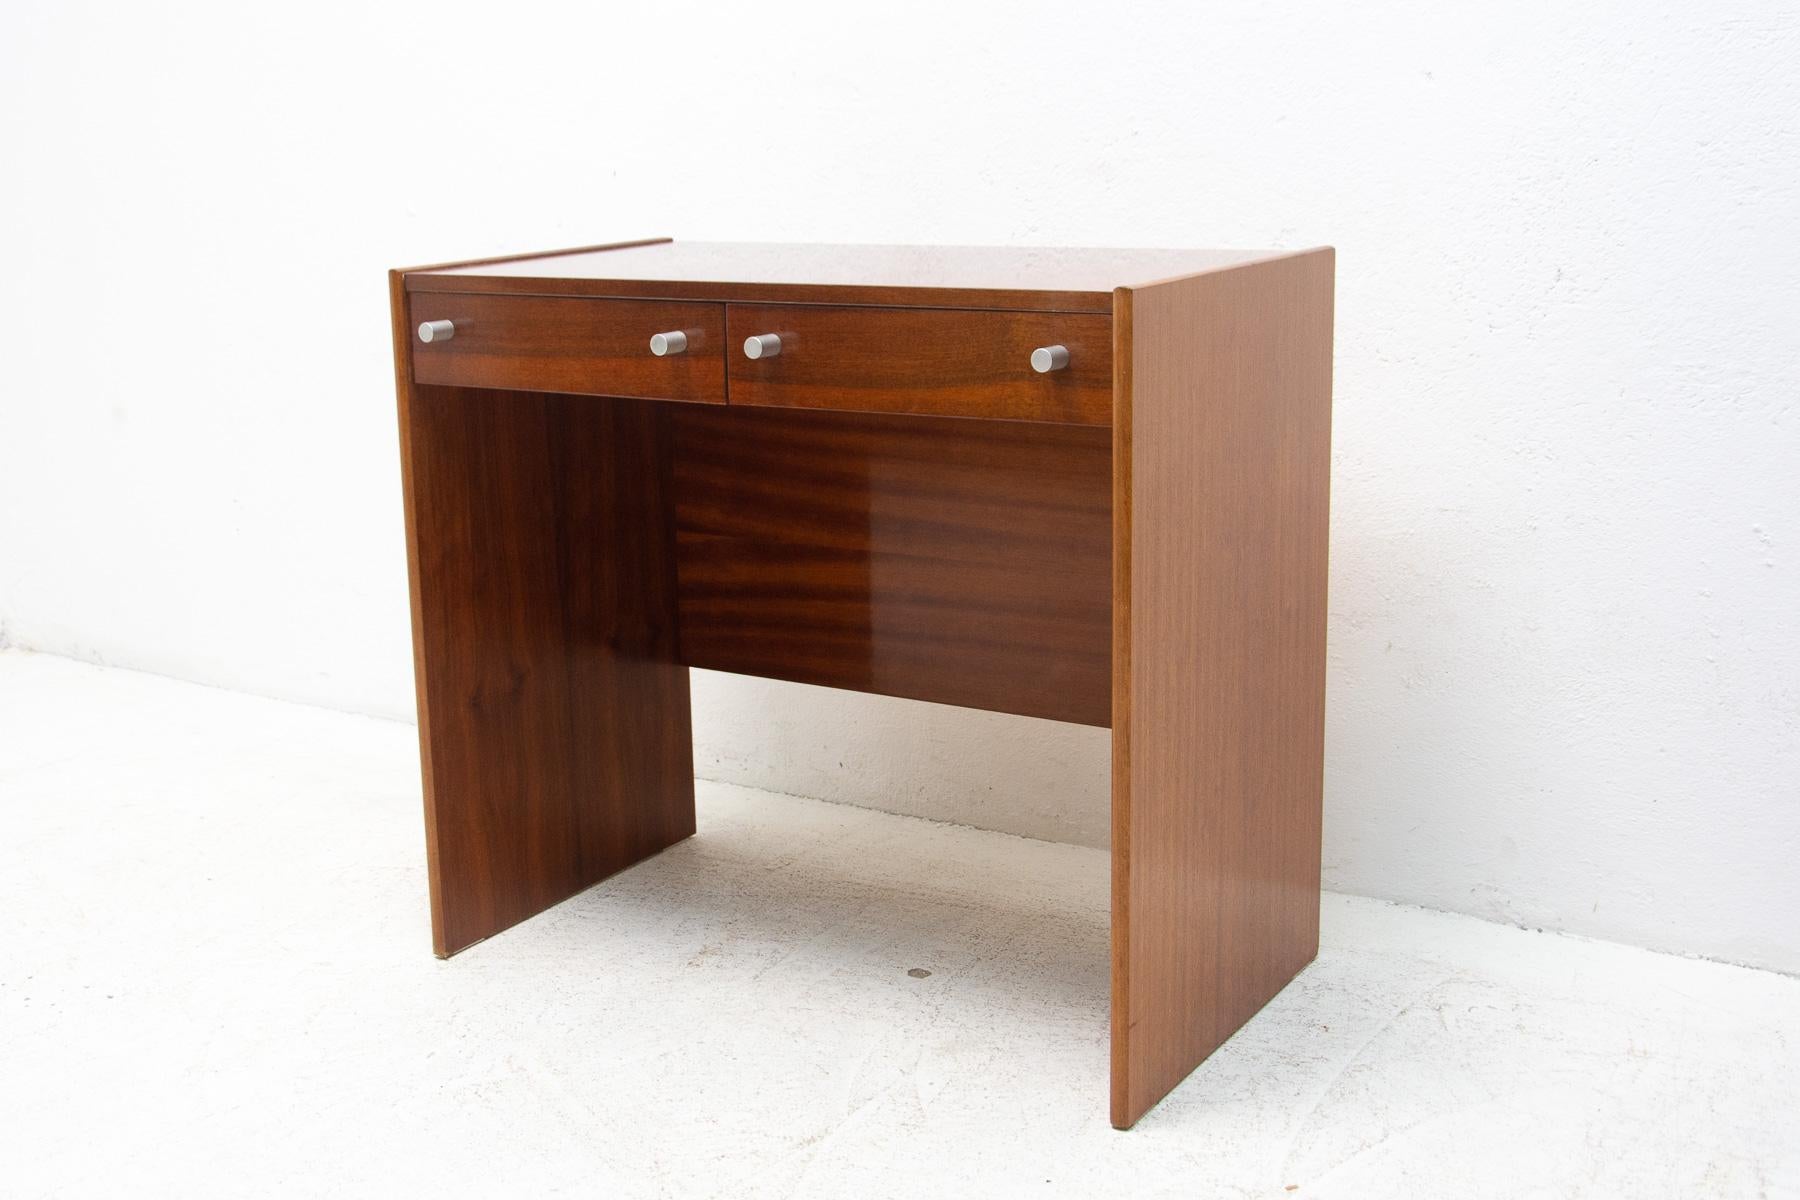 Vintage ladies desk made by UP Zavody company in the former Czechoslovakia in the 1980´s. Features a simple design, mahogany veneer. Overall in very good Vintage condition. Cool retro piece.

Measures: height: 72 cm

Width: 80 cm

Depth: 48 cm.